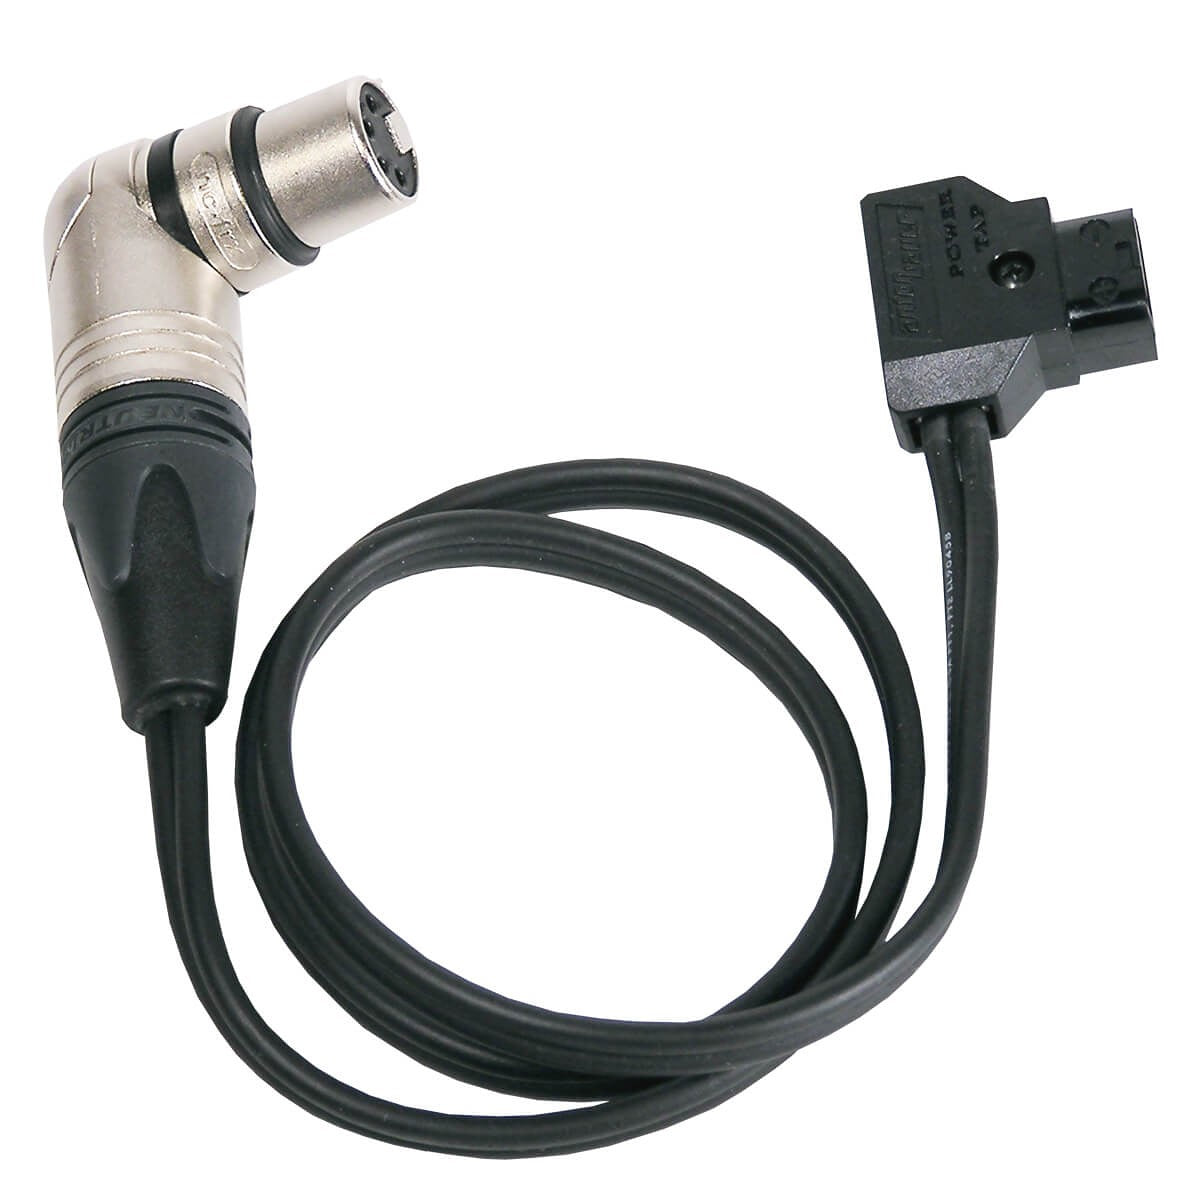 Anton Bauer PowerTap 20 XLR | 20 inch PowerTap to Right Angle 4P XLR Female Cable 8075-0089